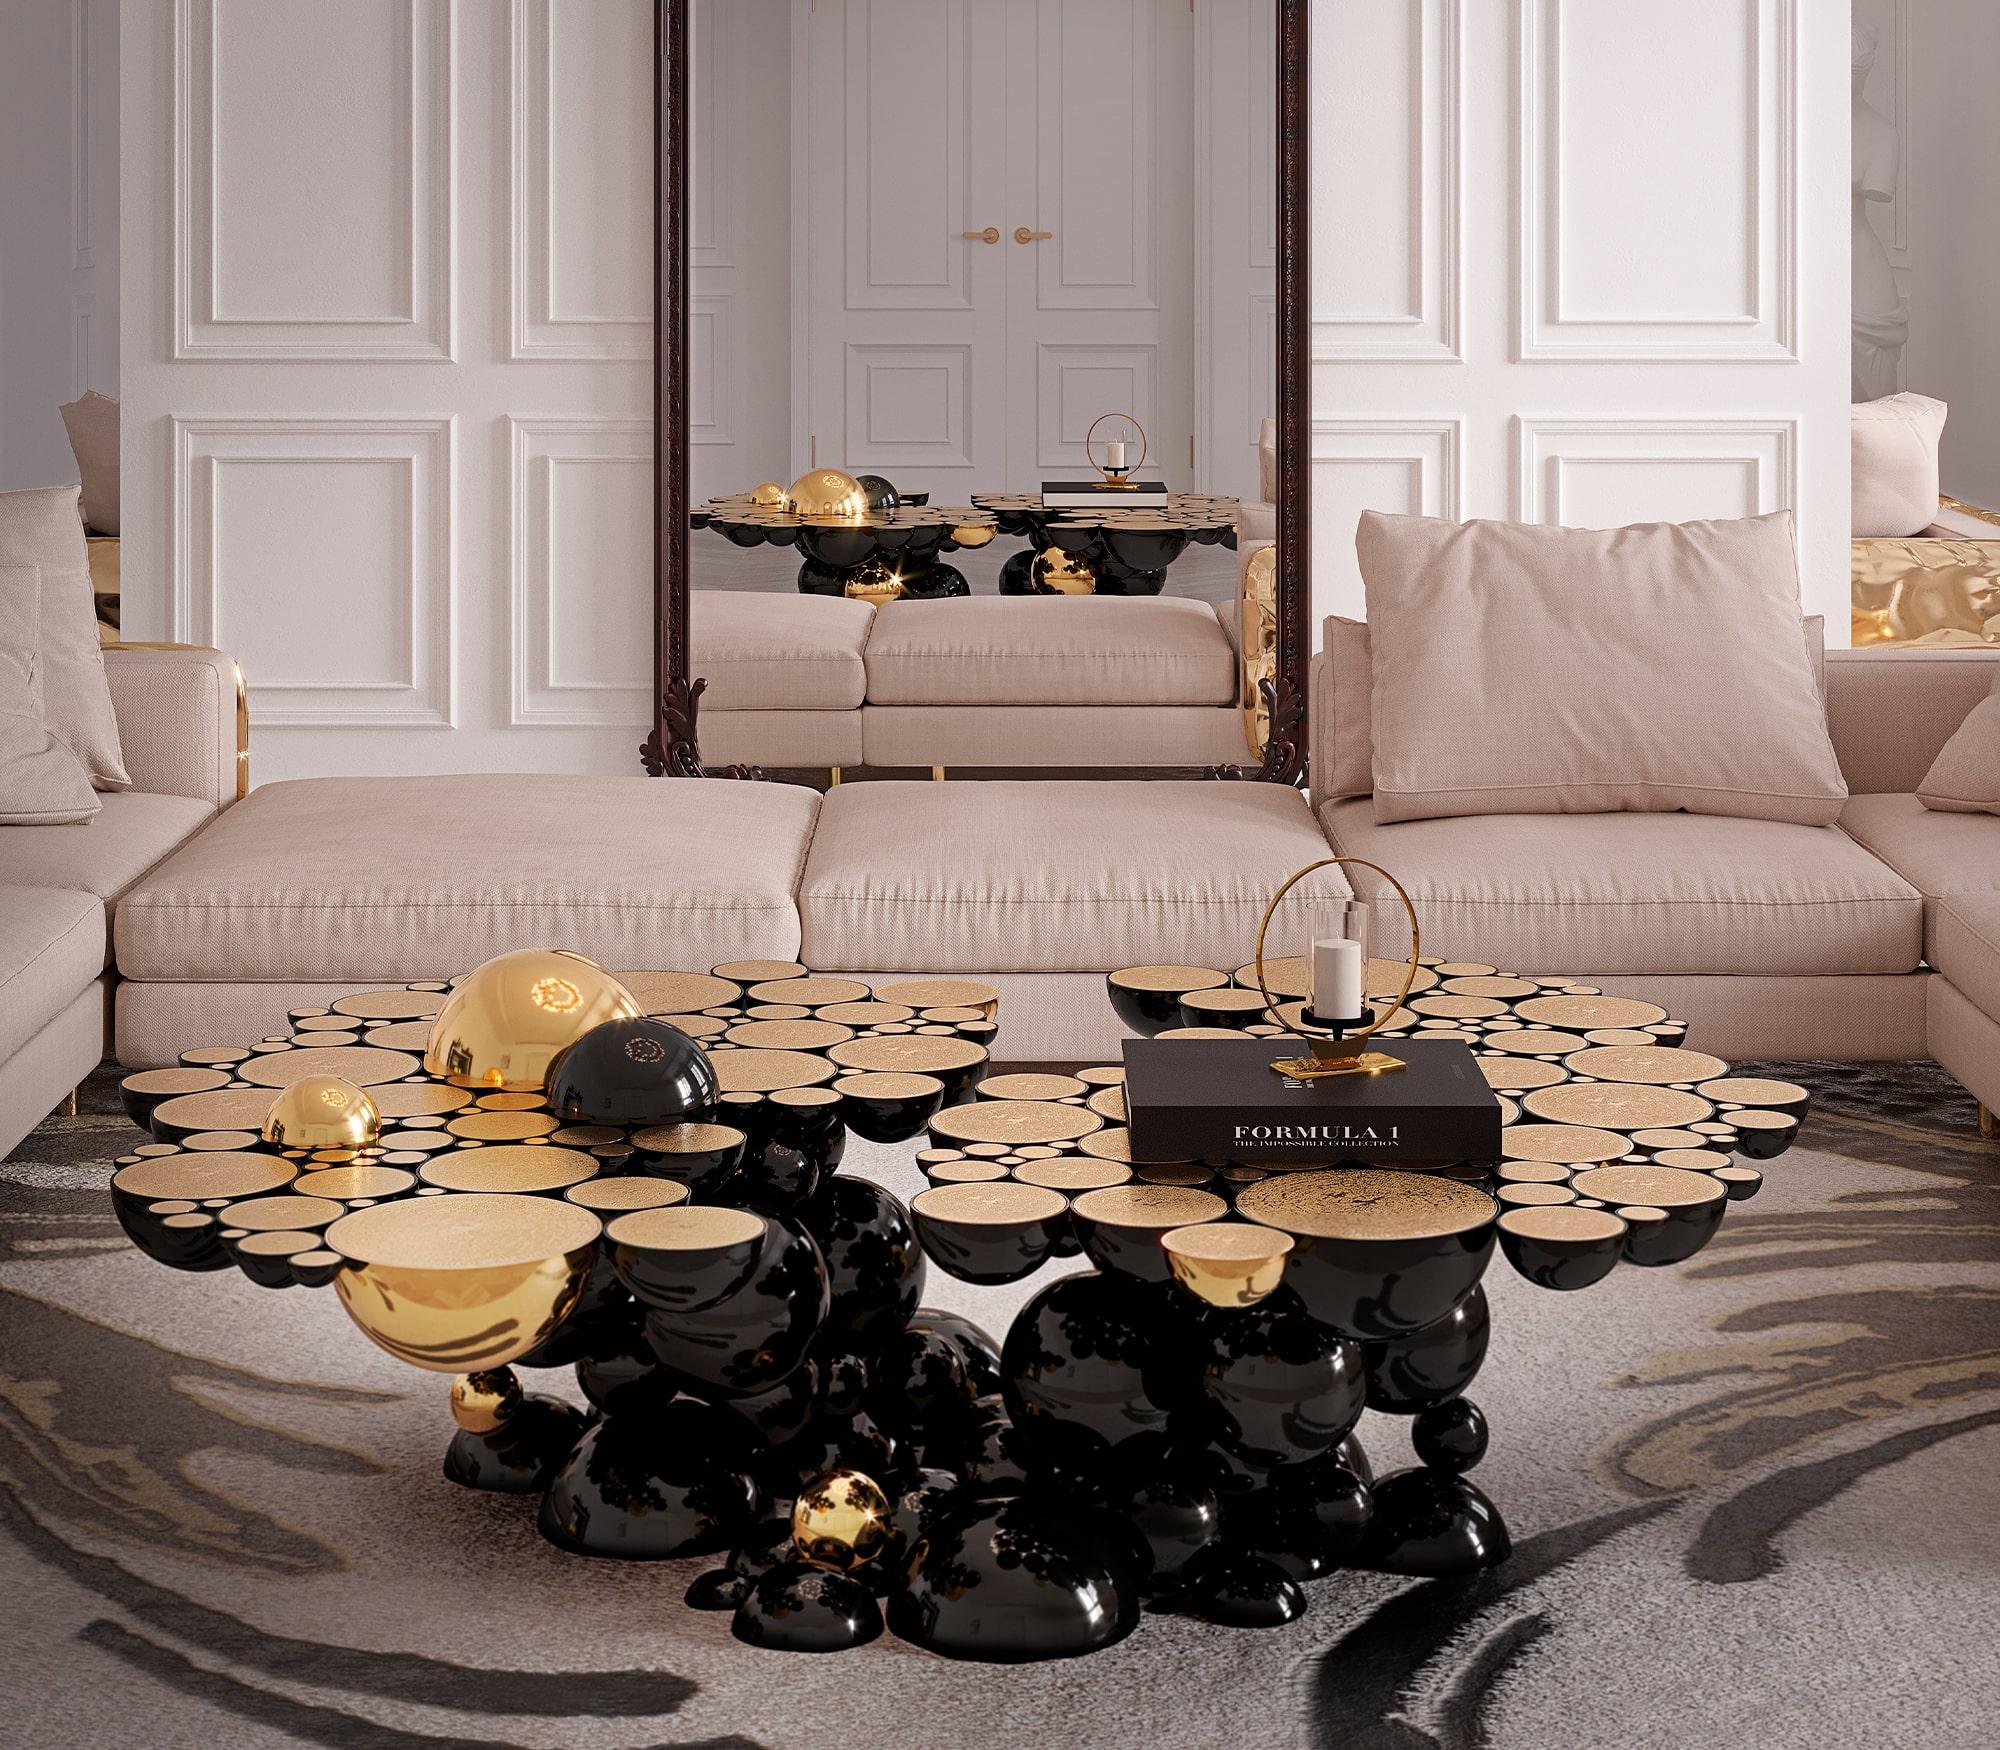 Modern Newton Center Table in Black Lacquer with Golden Details by Boca do Lobo For Sale 3